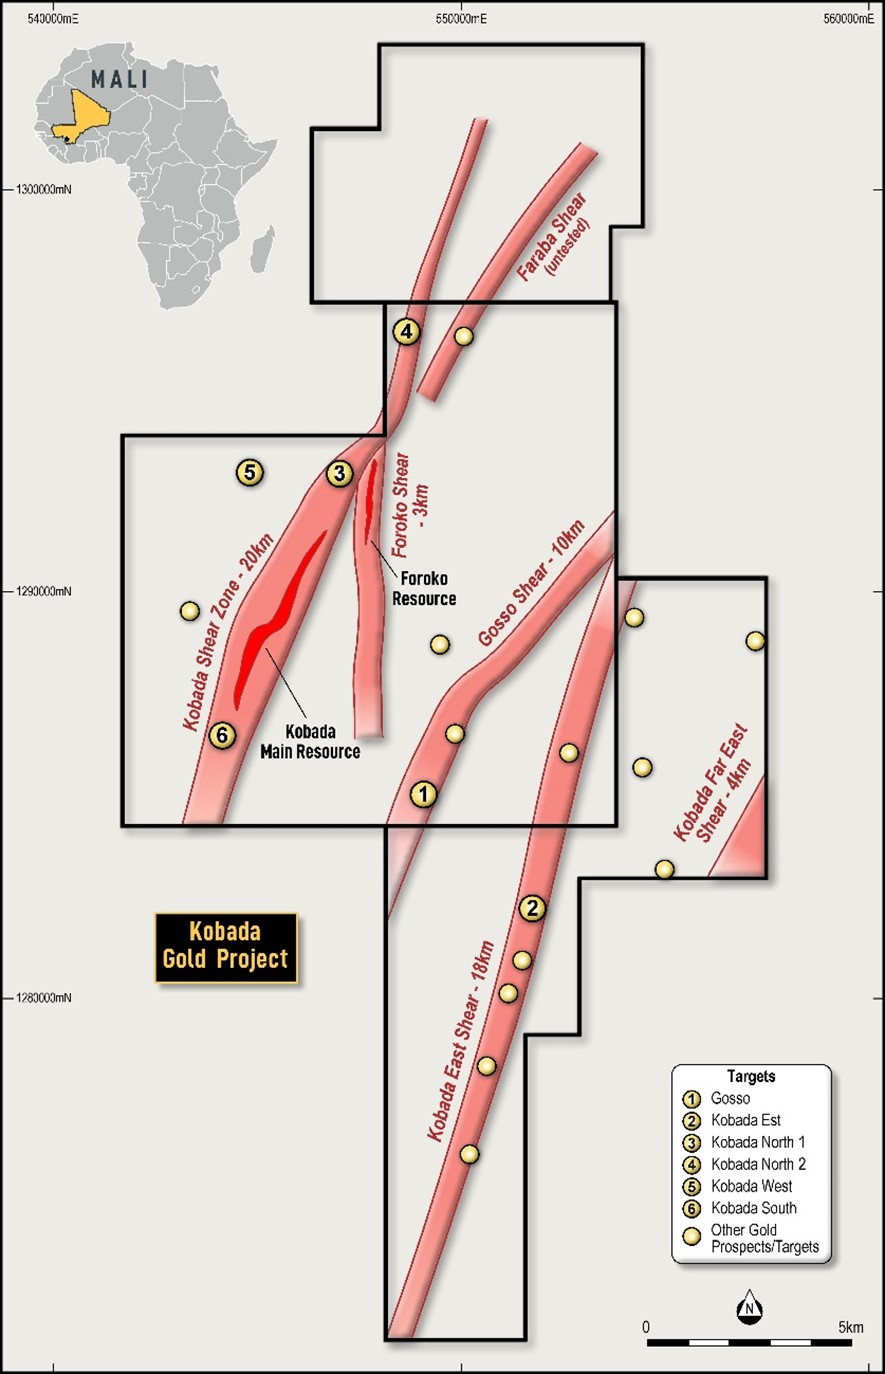 Plan showing 2023 drill targets within the Kobada Gold Project